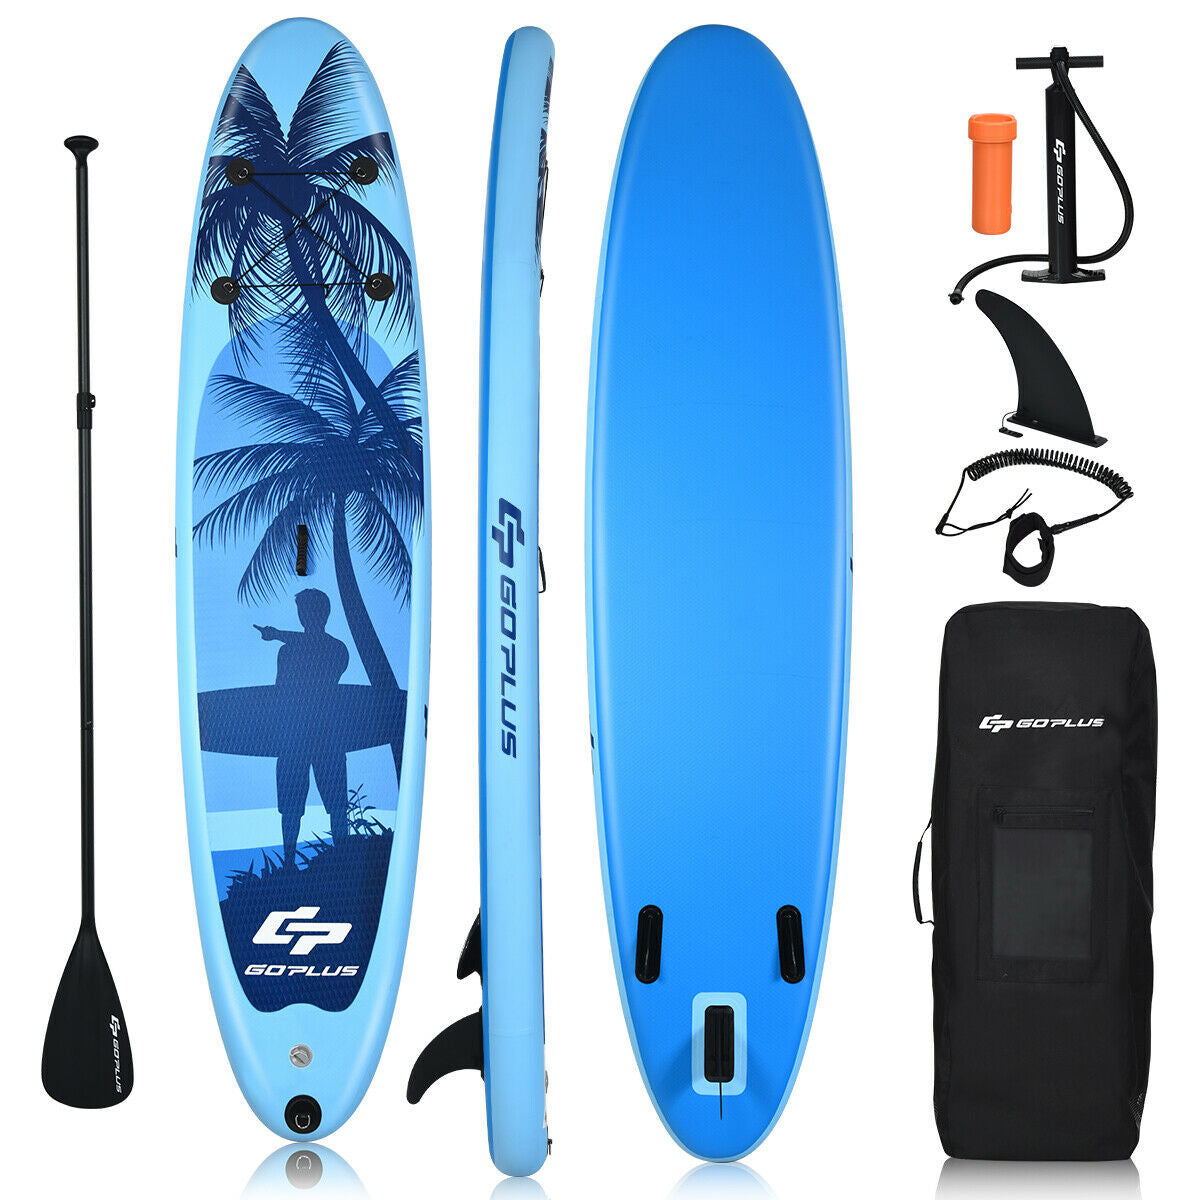 Complete SUP Kit & Easy Inflation: The package includes an adjustable paddle, manual air pump, backpack, safety leash, repair kit, and removable fin, providing a comprehensive SUP experience. The manual air pump allows for quick and hassle-free inflation. When deflated and rolled up, the paddleboard becomes compact and easy to carry and store.